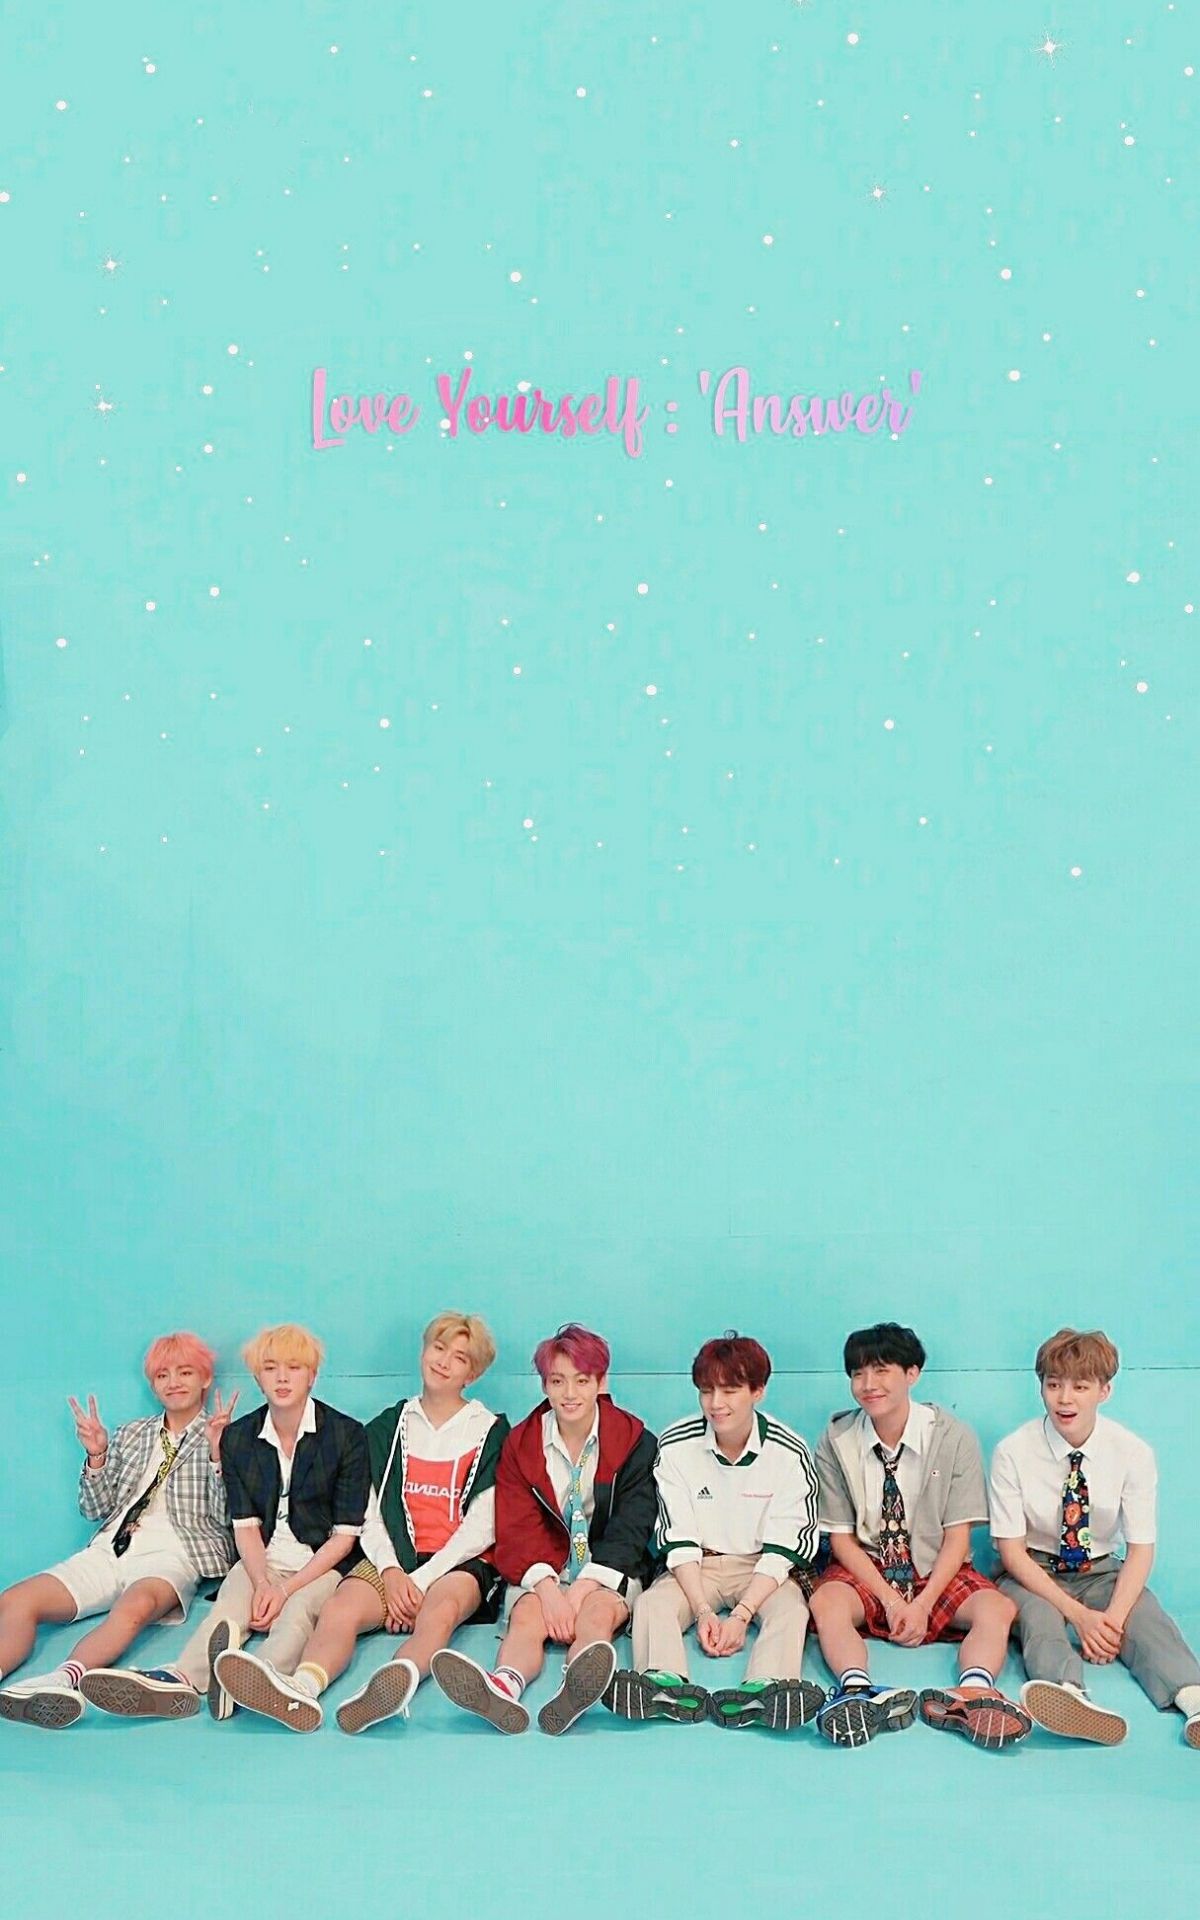 Free download BTS EDITS BTS WALLPAPERS BTS LOVE YOURSELF Answer